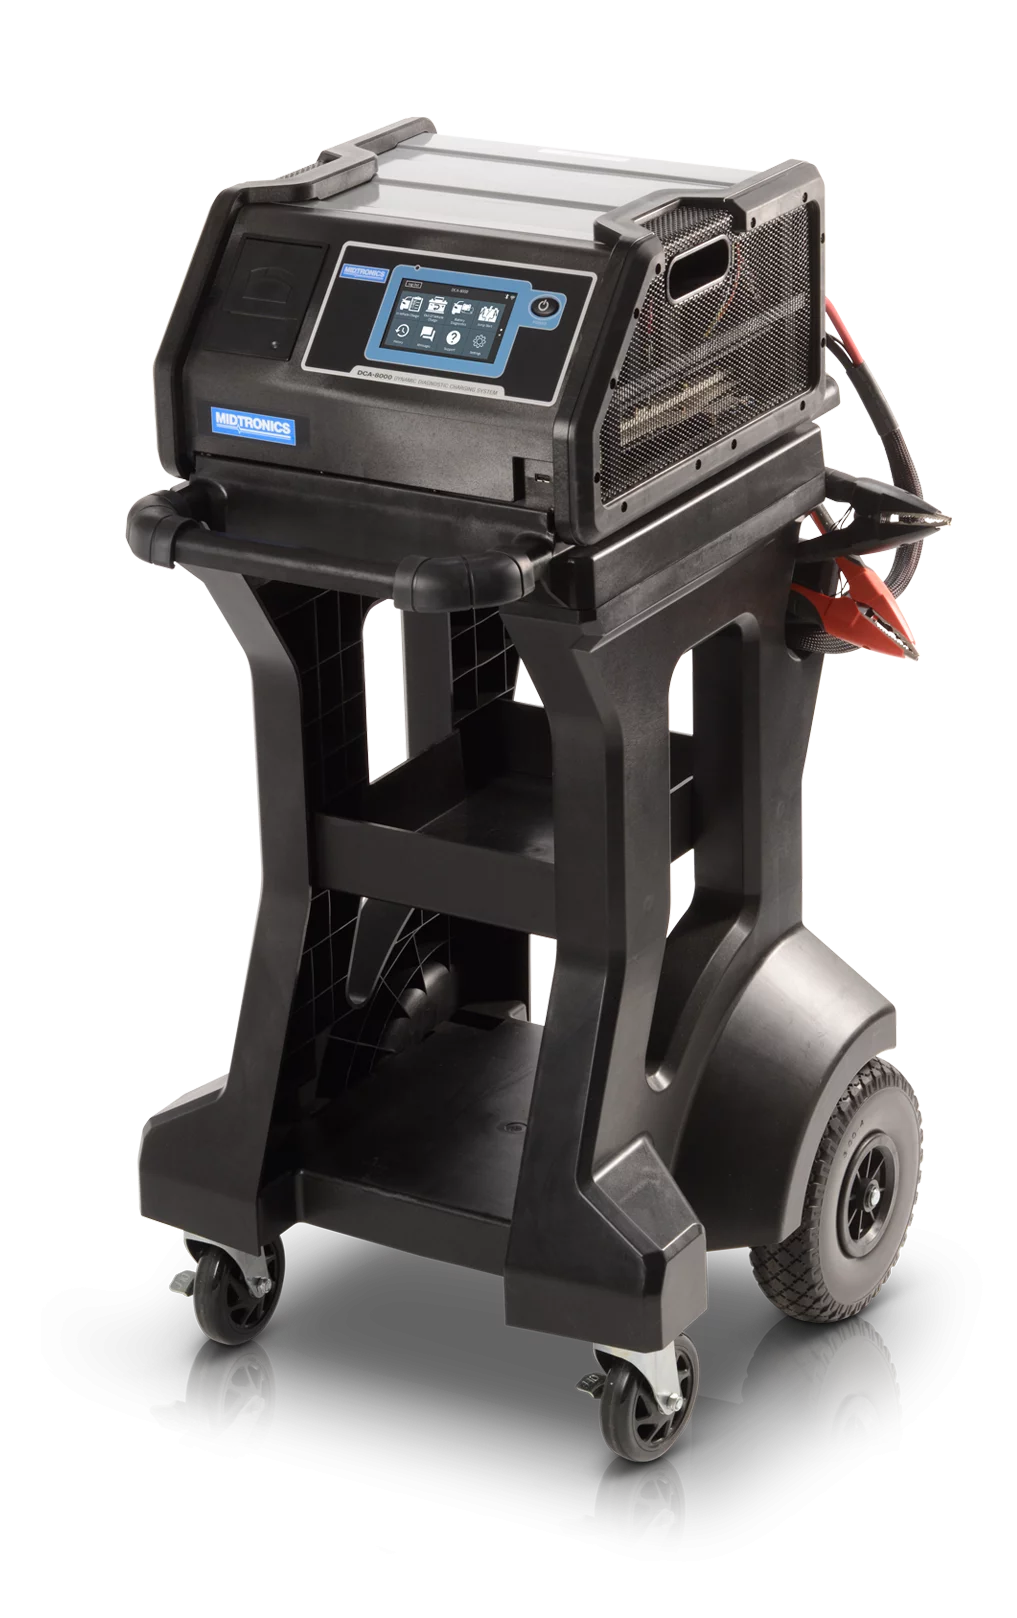 Midtronics DCA-8000 diagnostic battery charger on a cart